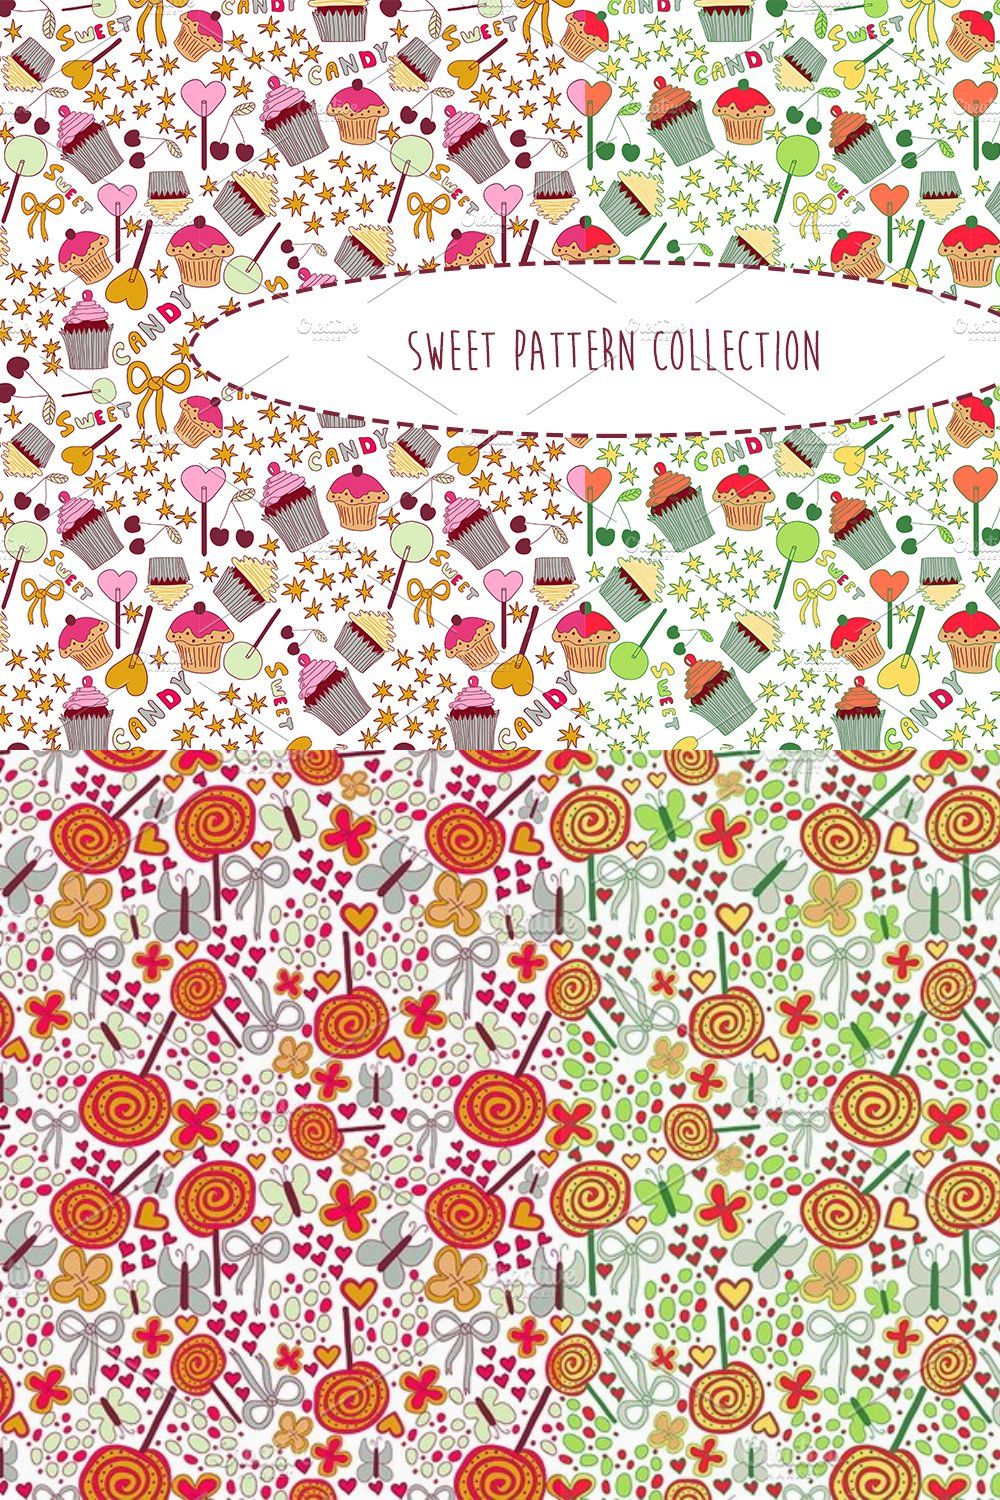 Sweet pattern collection pinterest preview image.